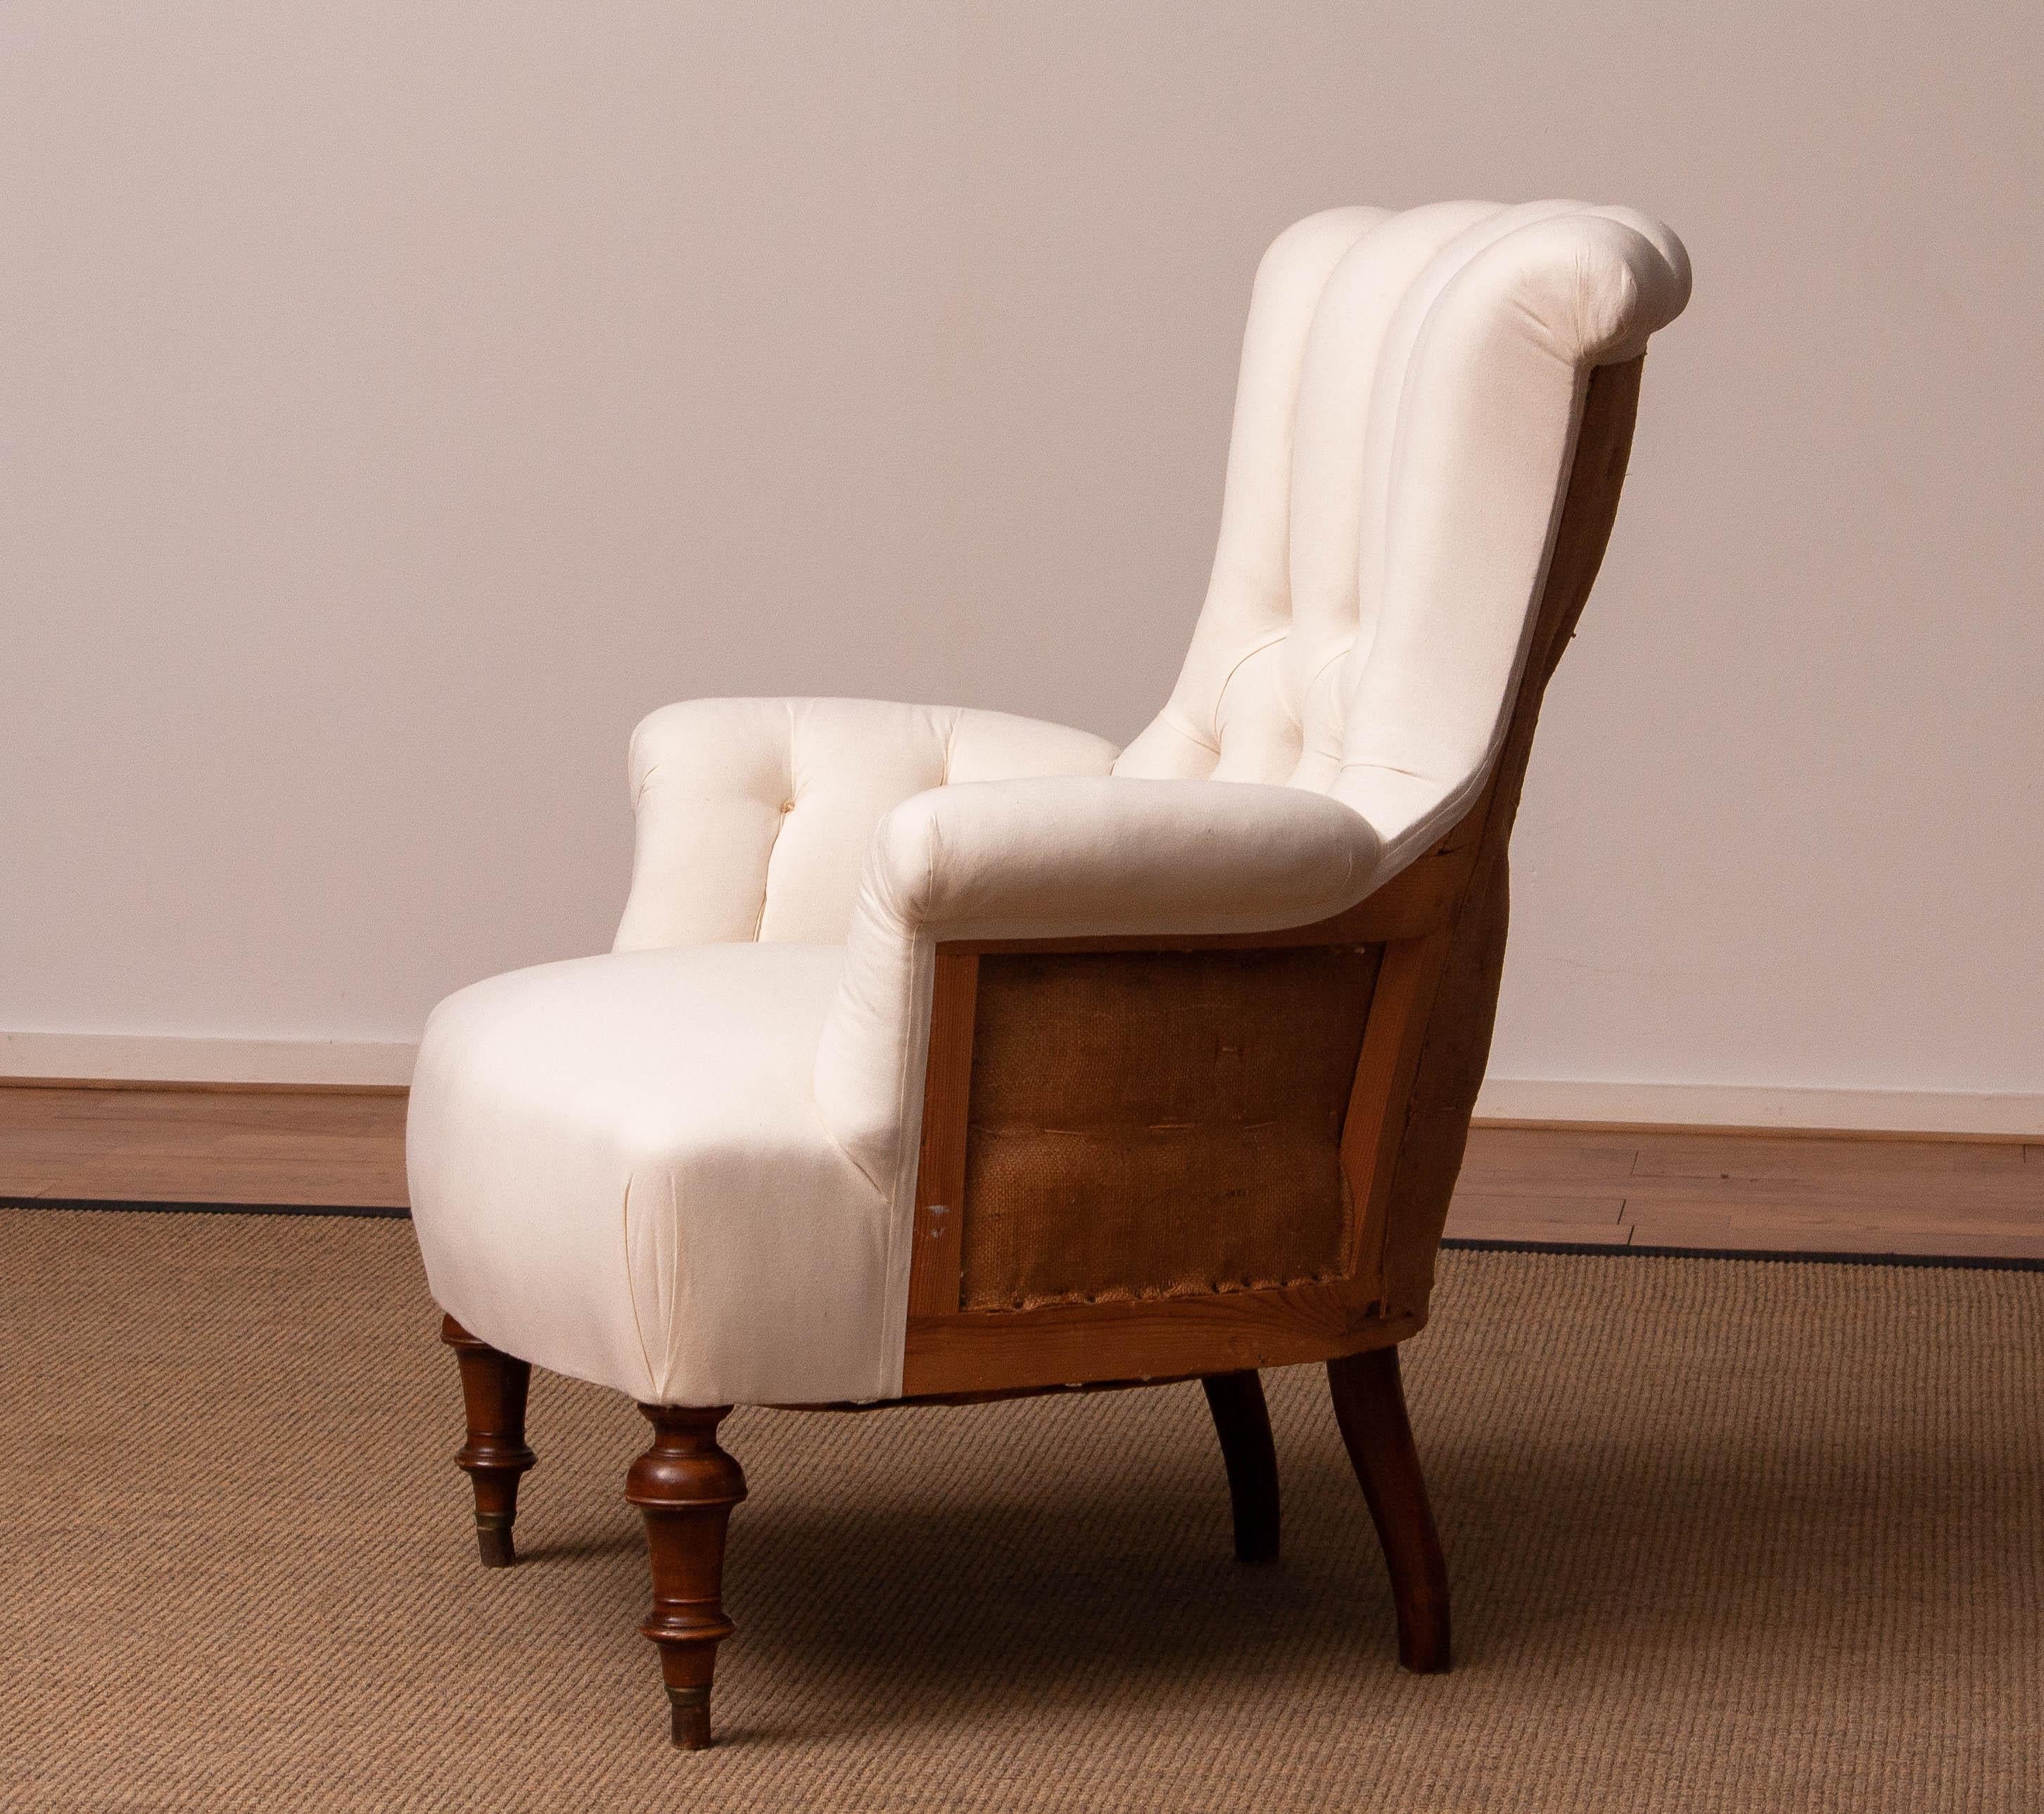 Absolutely beautiful original Victorian lounge chair, completely and professionally restored in 